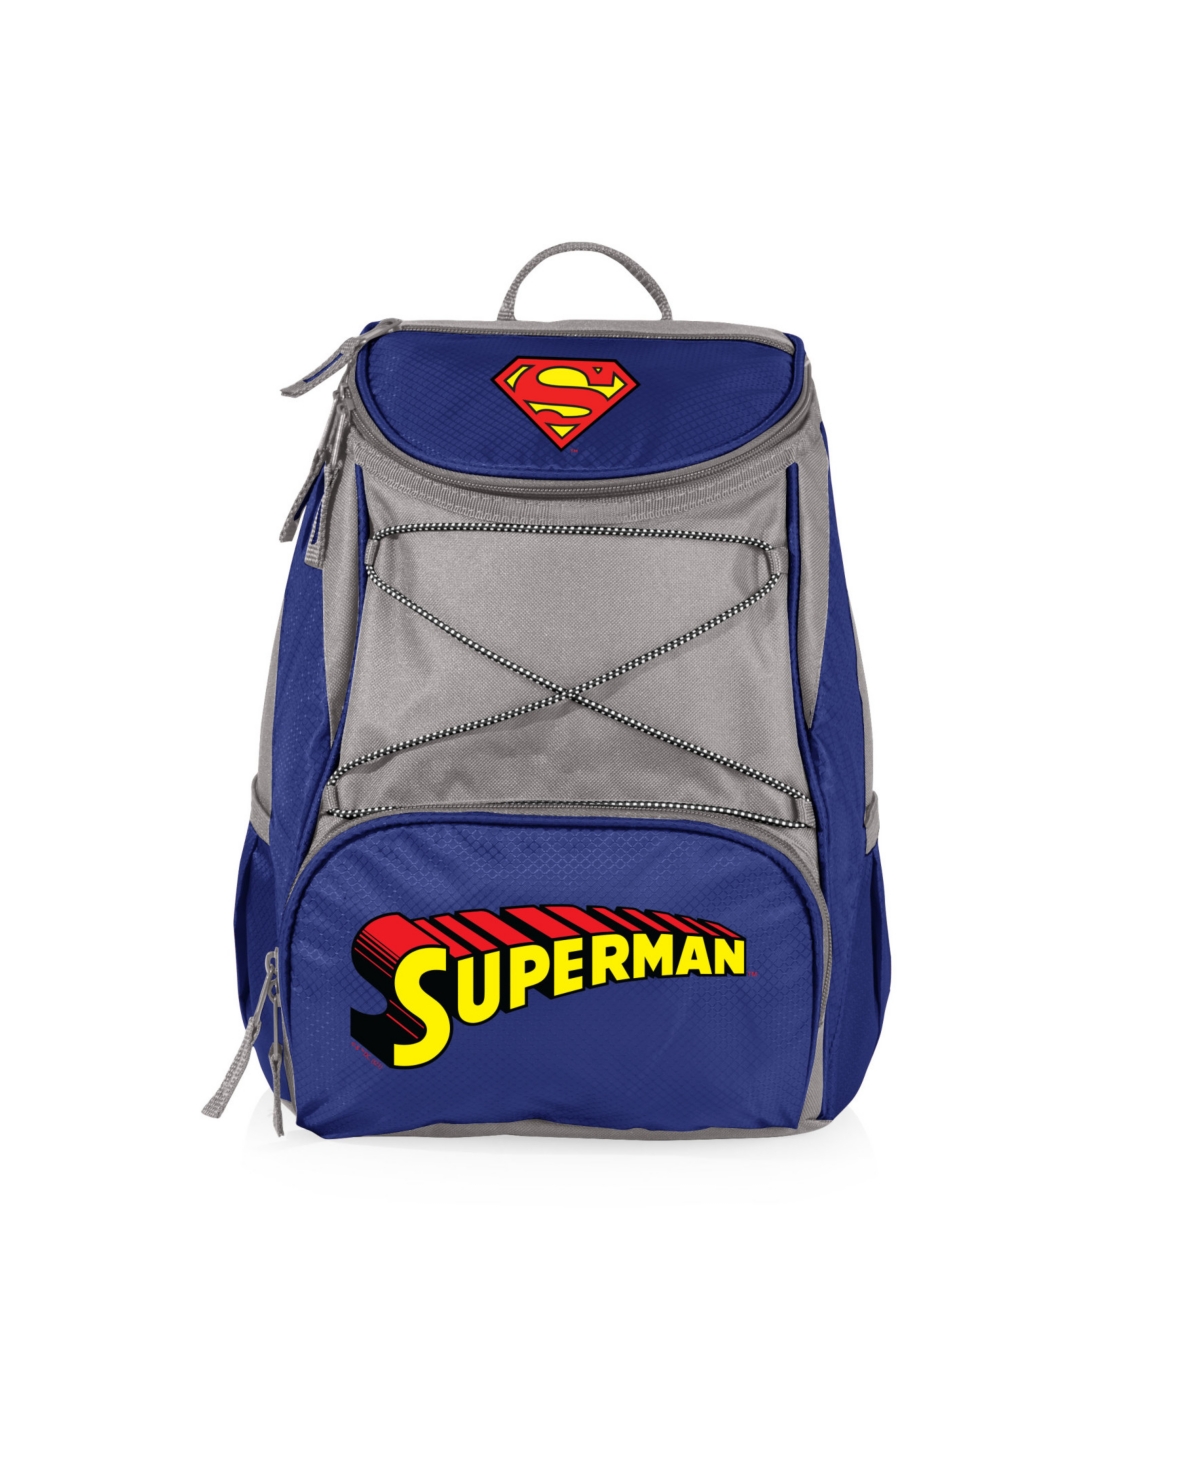 Oniva Superman Ptx Cooler Backpack In Navy Blue With Gray Accents